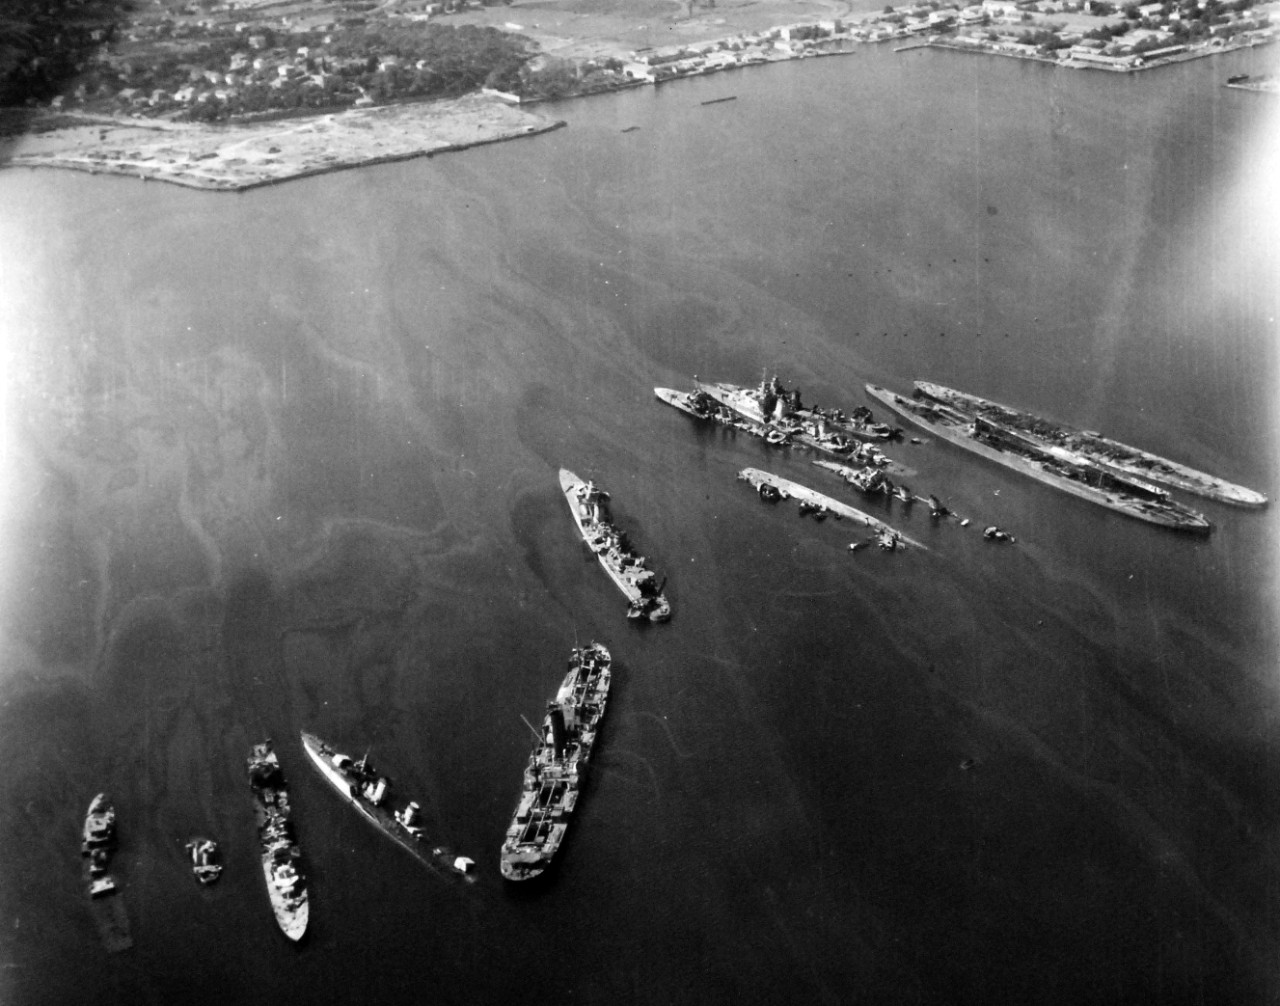 80-G-364002:  Invasion of Southern France, Toulon, August 1944.   Aerial view of the destruction to the harbor and installations at Toulon, France.  Taken by crew of USS Catoctin   (AGC 5).  Photograph received on 2 April 1946.   Official U.S. Navy Photograph, now in the collections of the National Archives.  (2014/7/10).